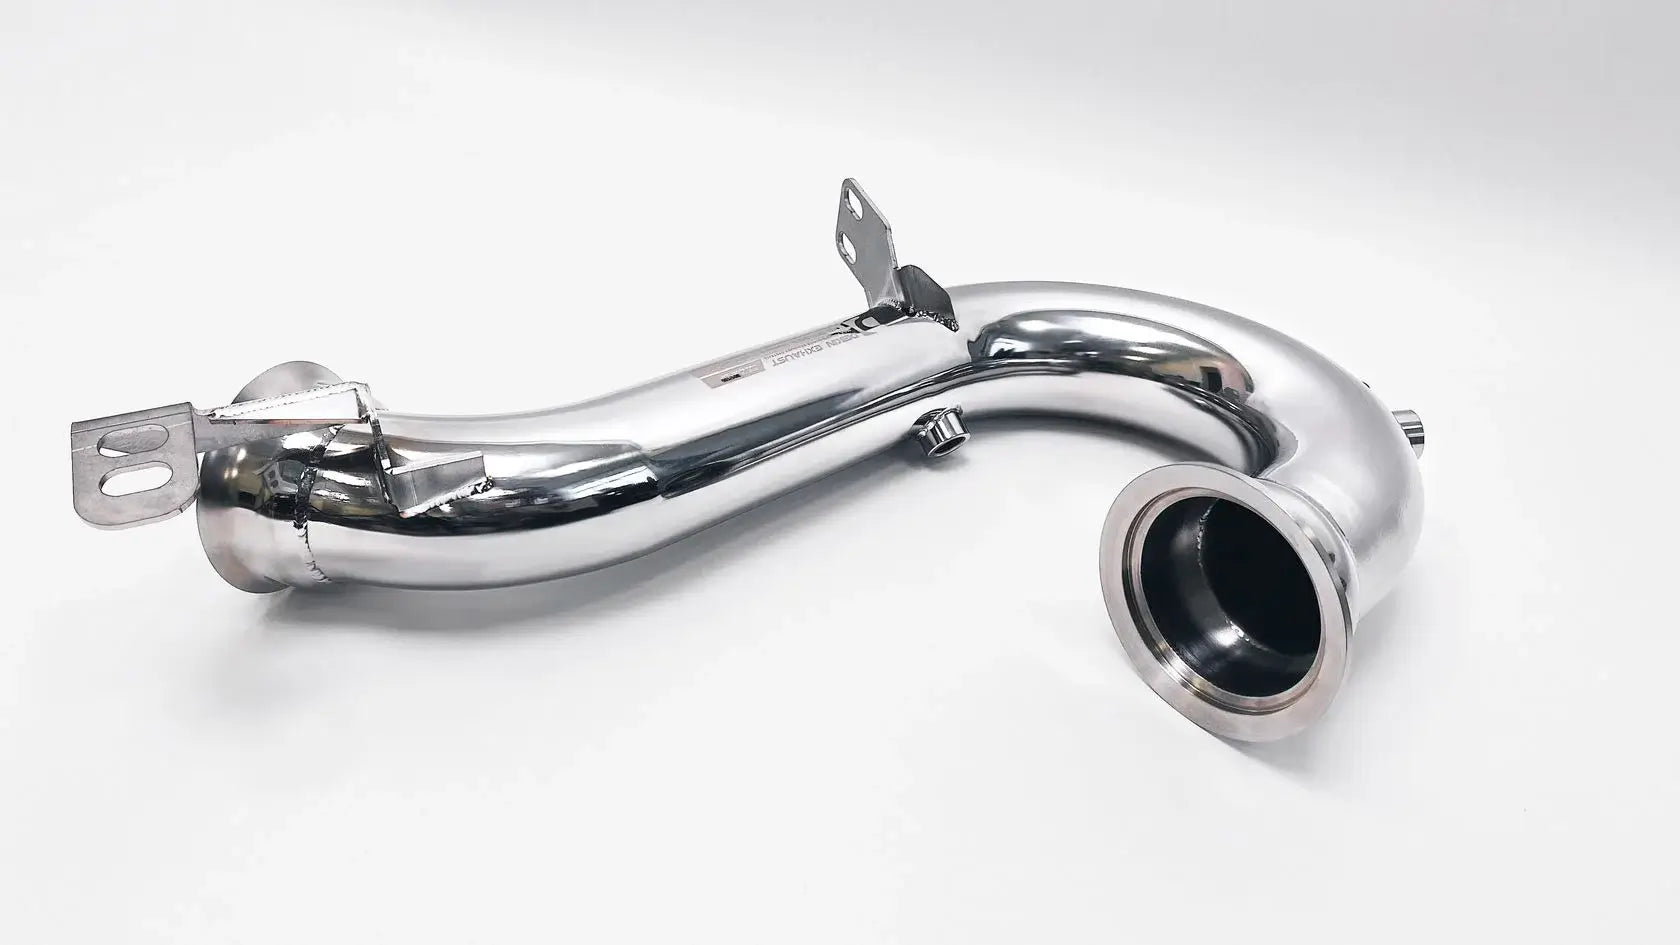 DEIKIN 10-MB.GLE450.V167-DP Downpipe for Mercedes-AMG GLE450 (V167) without HeatShield Photo-0 